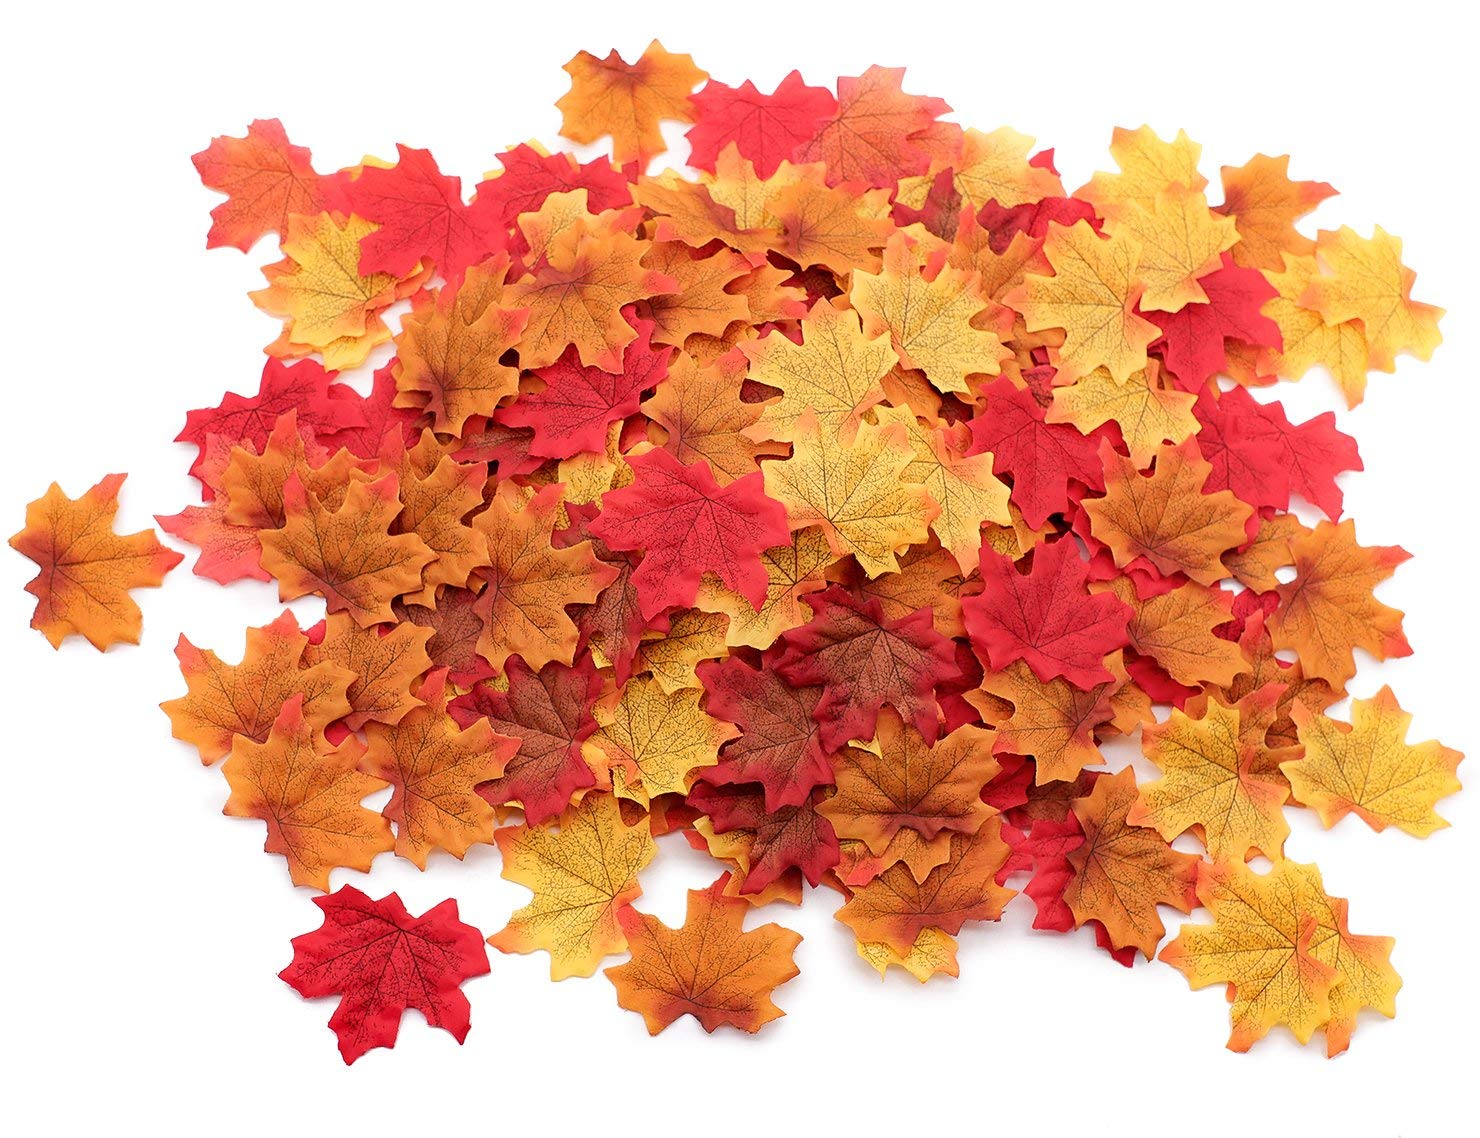 Buy Artificial Maple Leaves 5 Assorted Mixed Fake Fall Maple Leaf Lifelike Looking Silk Autumn Fall Leaf Garland for Thanksgiving Fall Themed Weeding Party Festival Table Decorations Online at Low Prices in